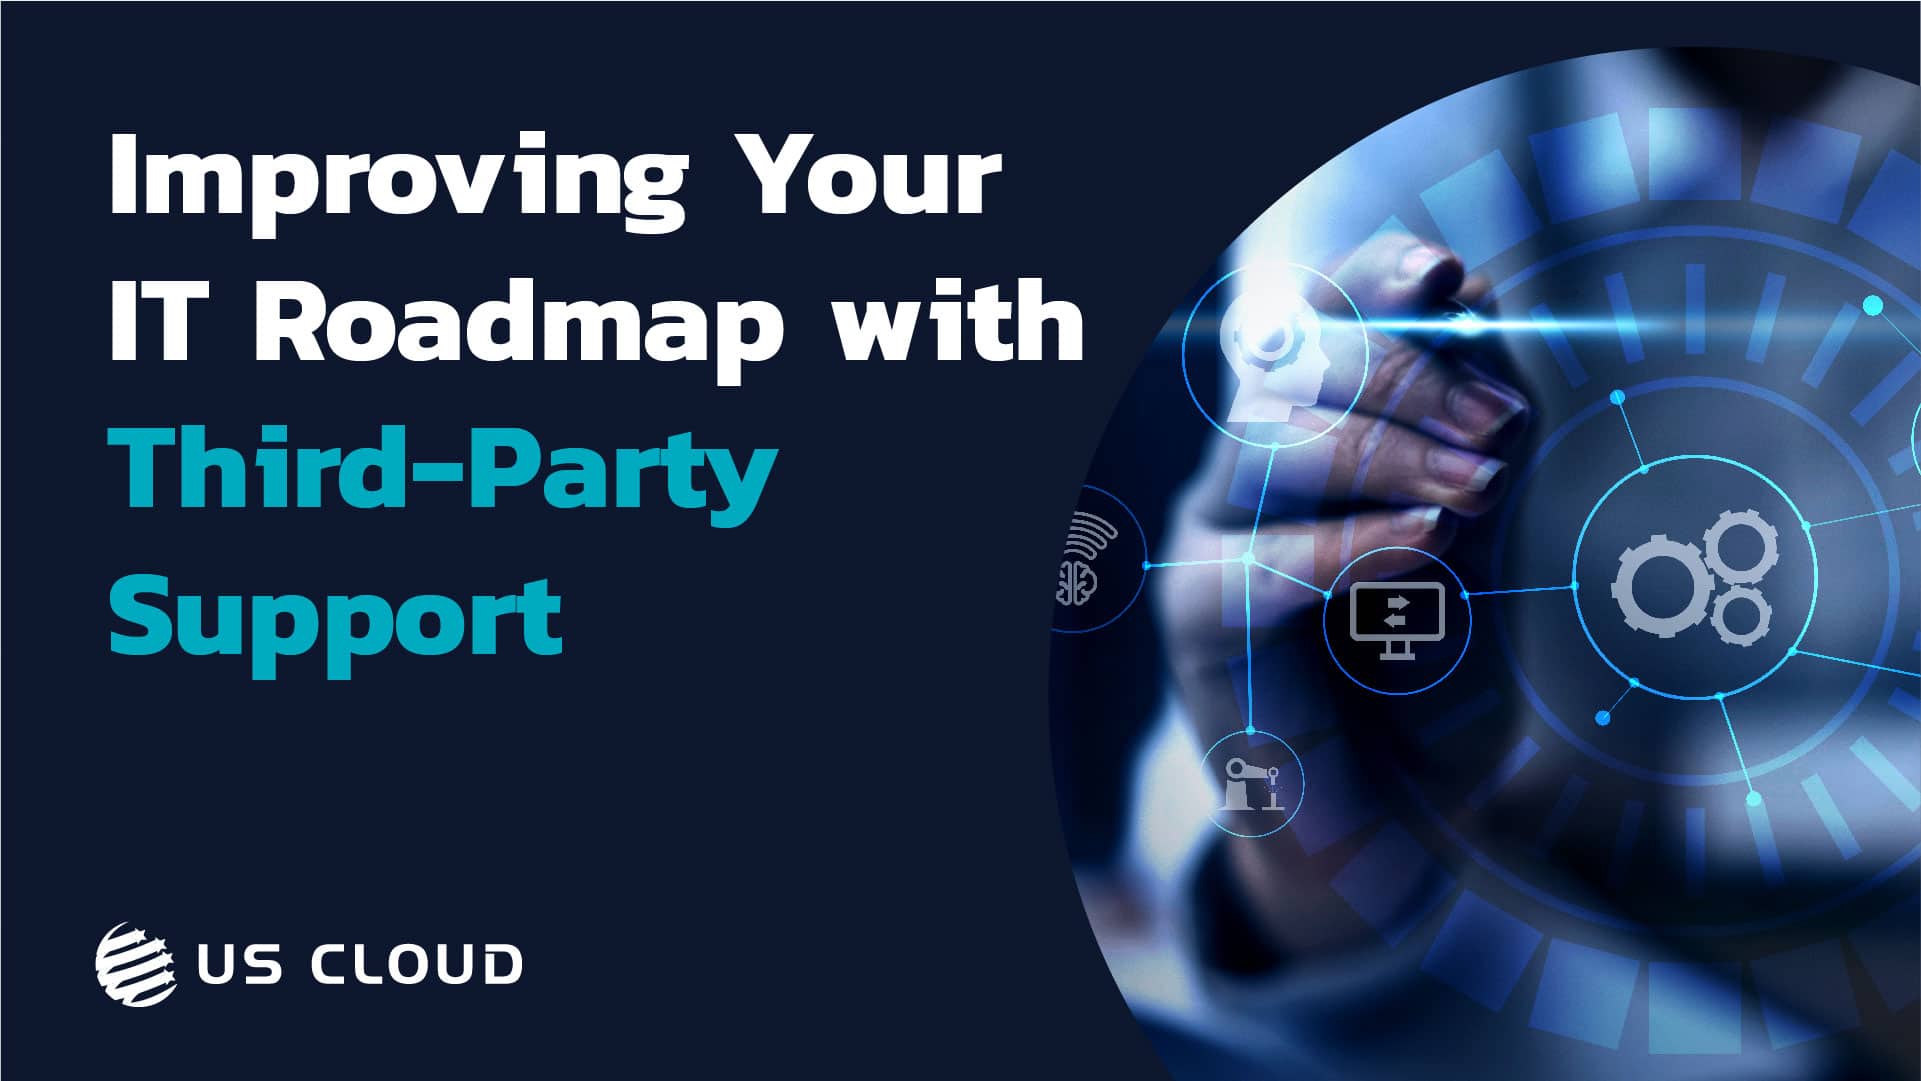 Fitting third-party support into your roadmap can make your life and business plans become exponentially easier.